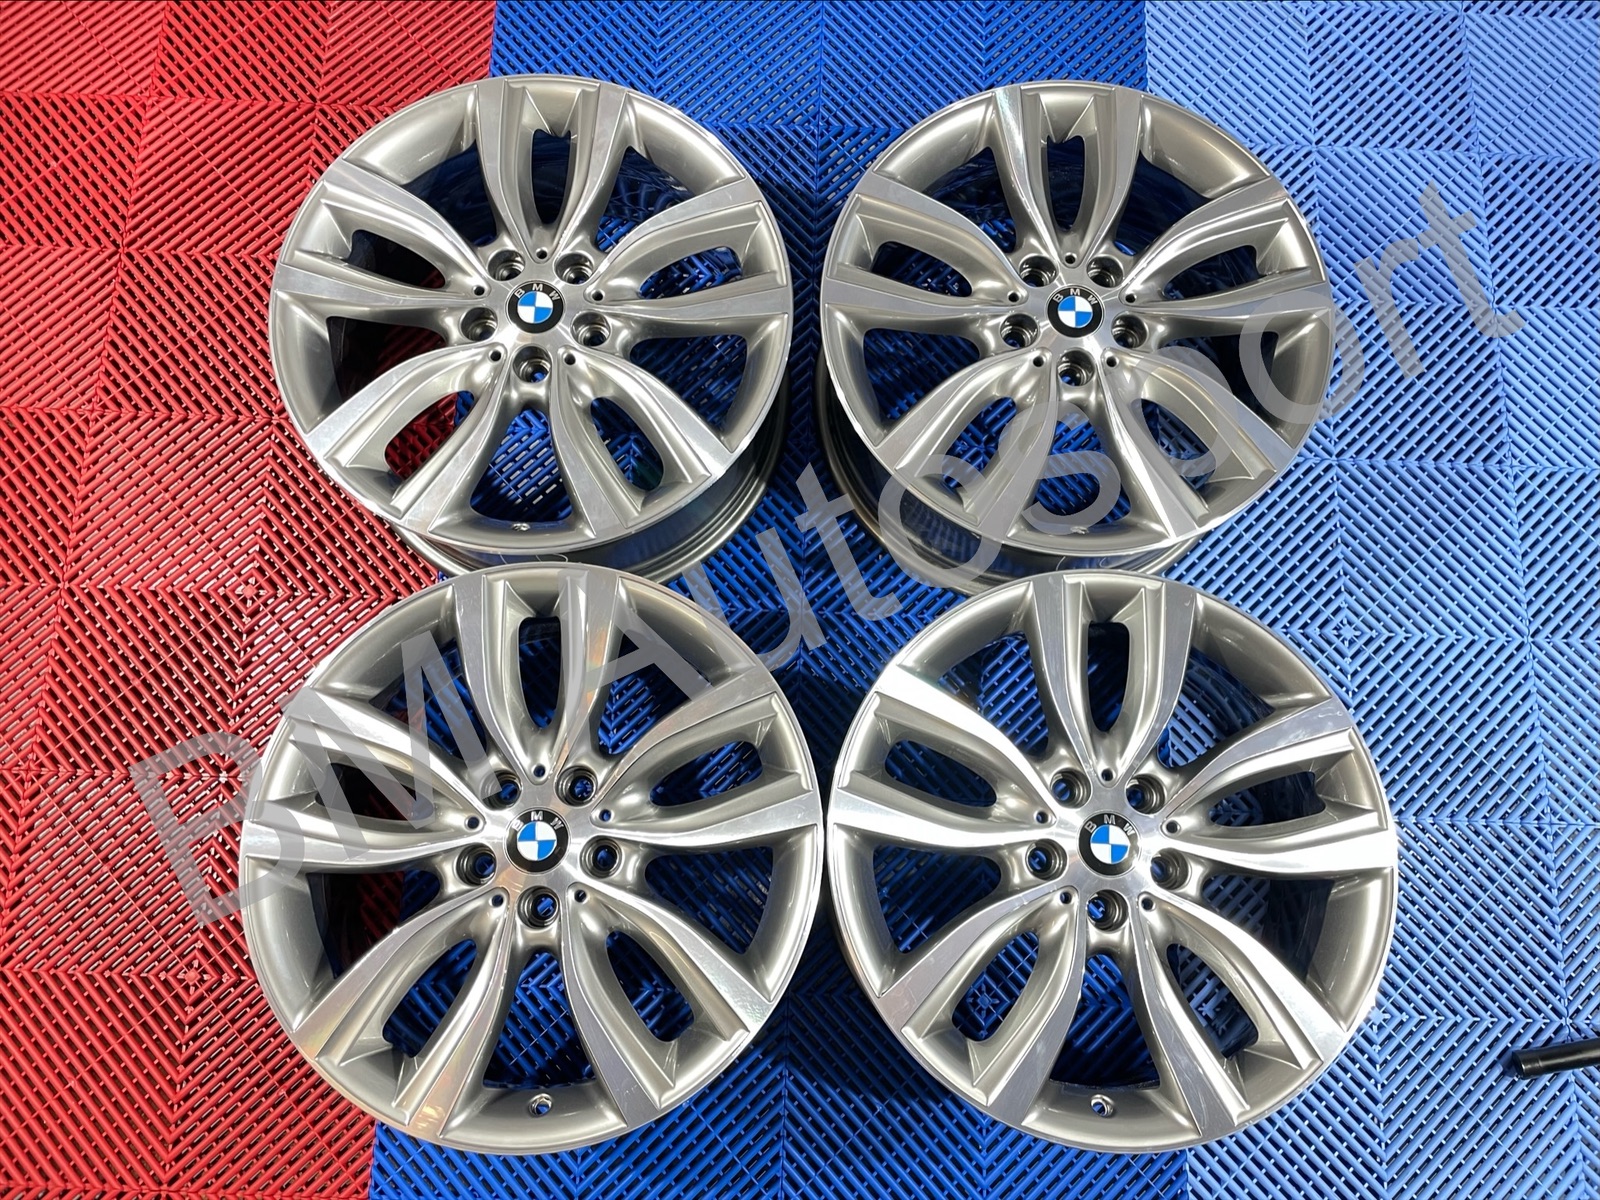 USED 18" GENUINE BMW STYLE 485 5 TWIN SPOKE ALLOY WHEELS,FULLY REFURBISHED IN GUNMETAL WITH POLISHED FACE